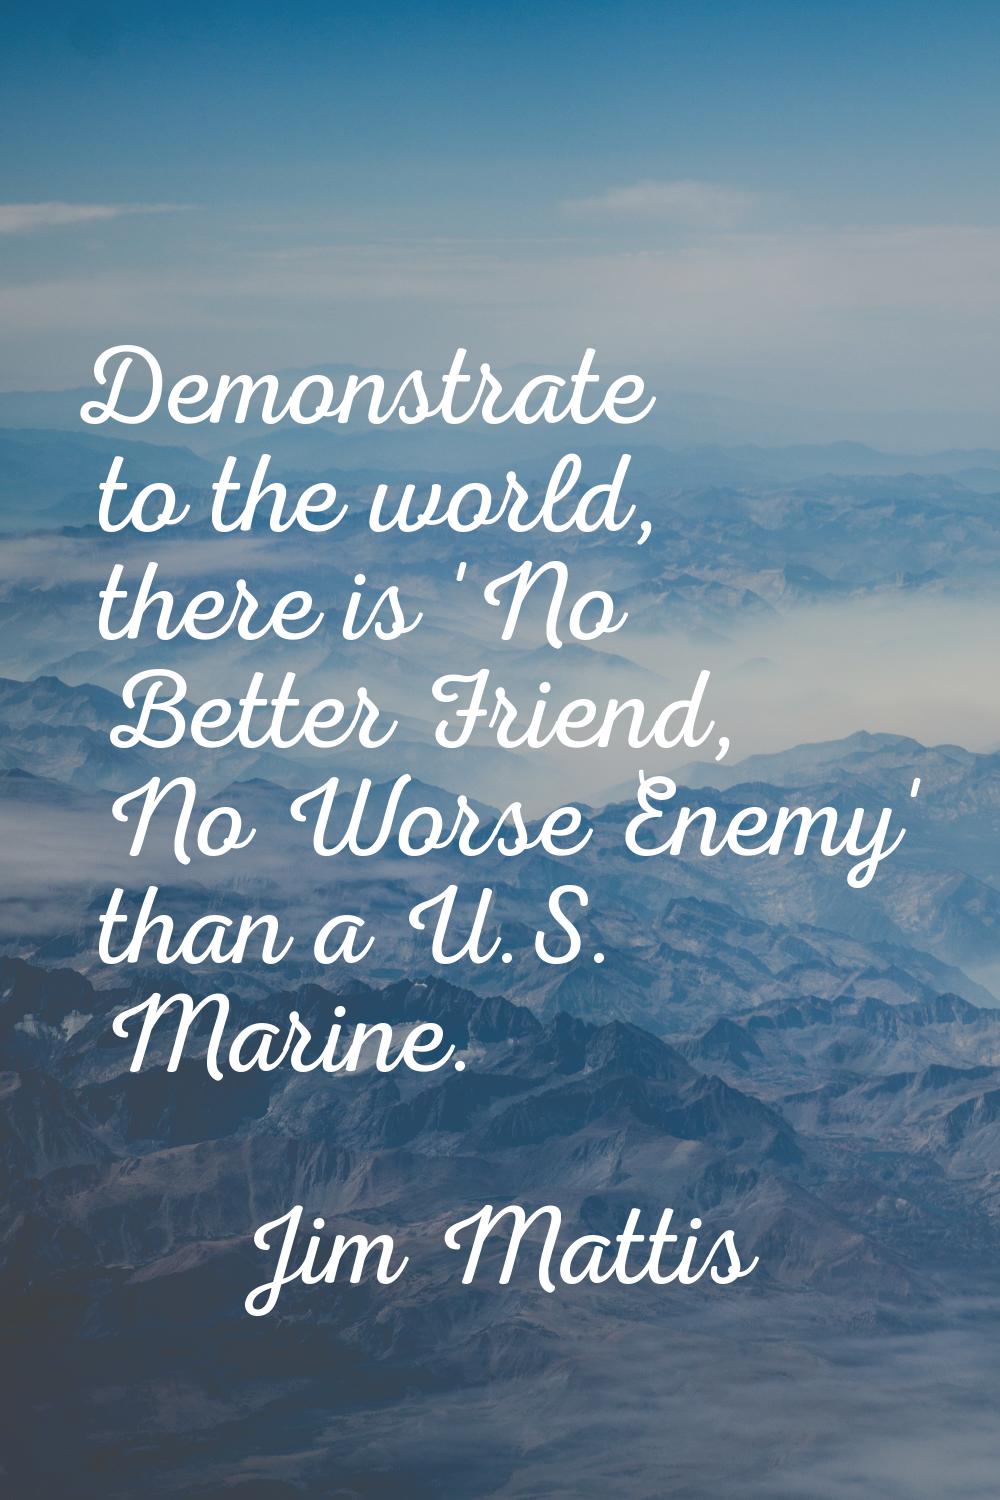 Demonstrate to the world, there is 'No Better Friend, No Worse Enemy' than a U.S. Marine.